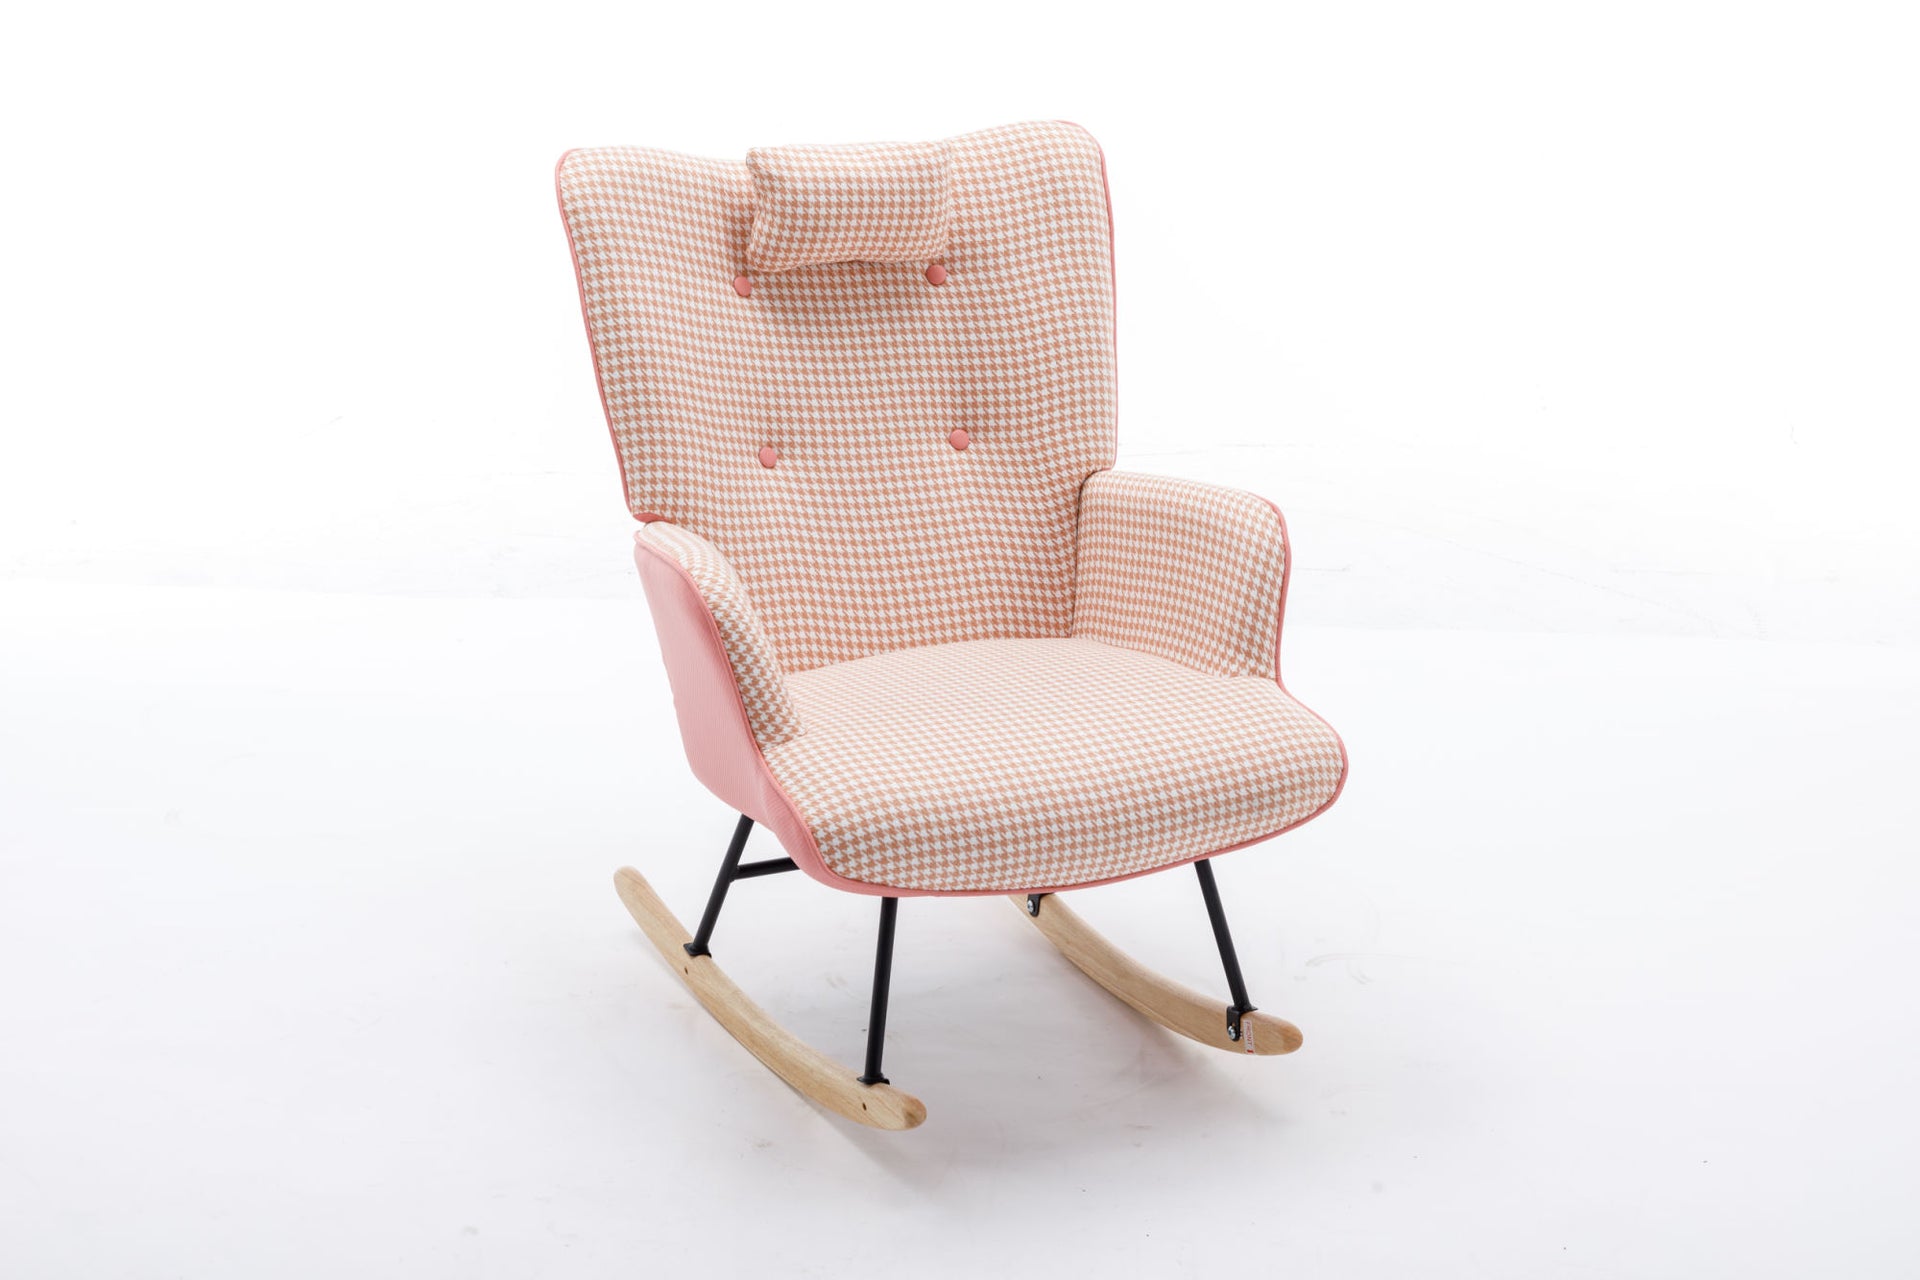 35.5 inch Rocking Chair, Soft Houndstooth Fabric Leather Fabric Rocking Chair for Nursery, Comfy Wingback Glider Rocker with Safe Solid Wood Base for Living Room Bedroom Balcony